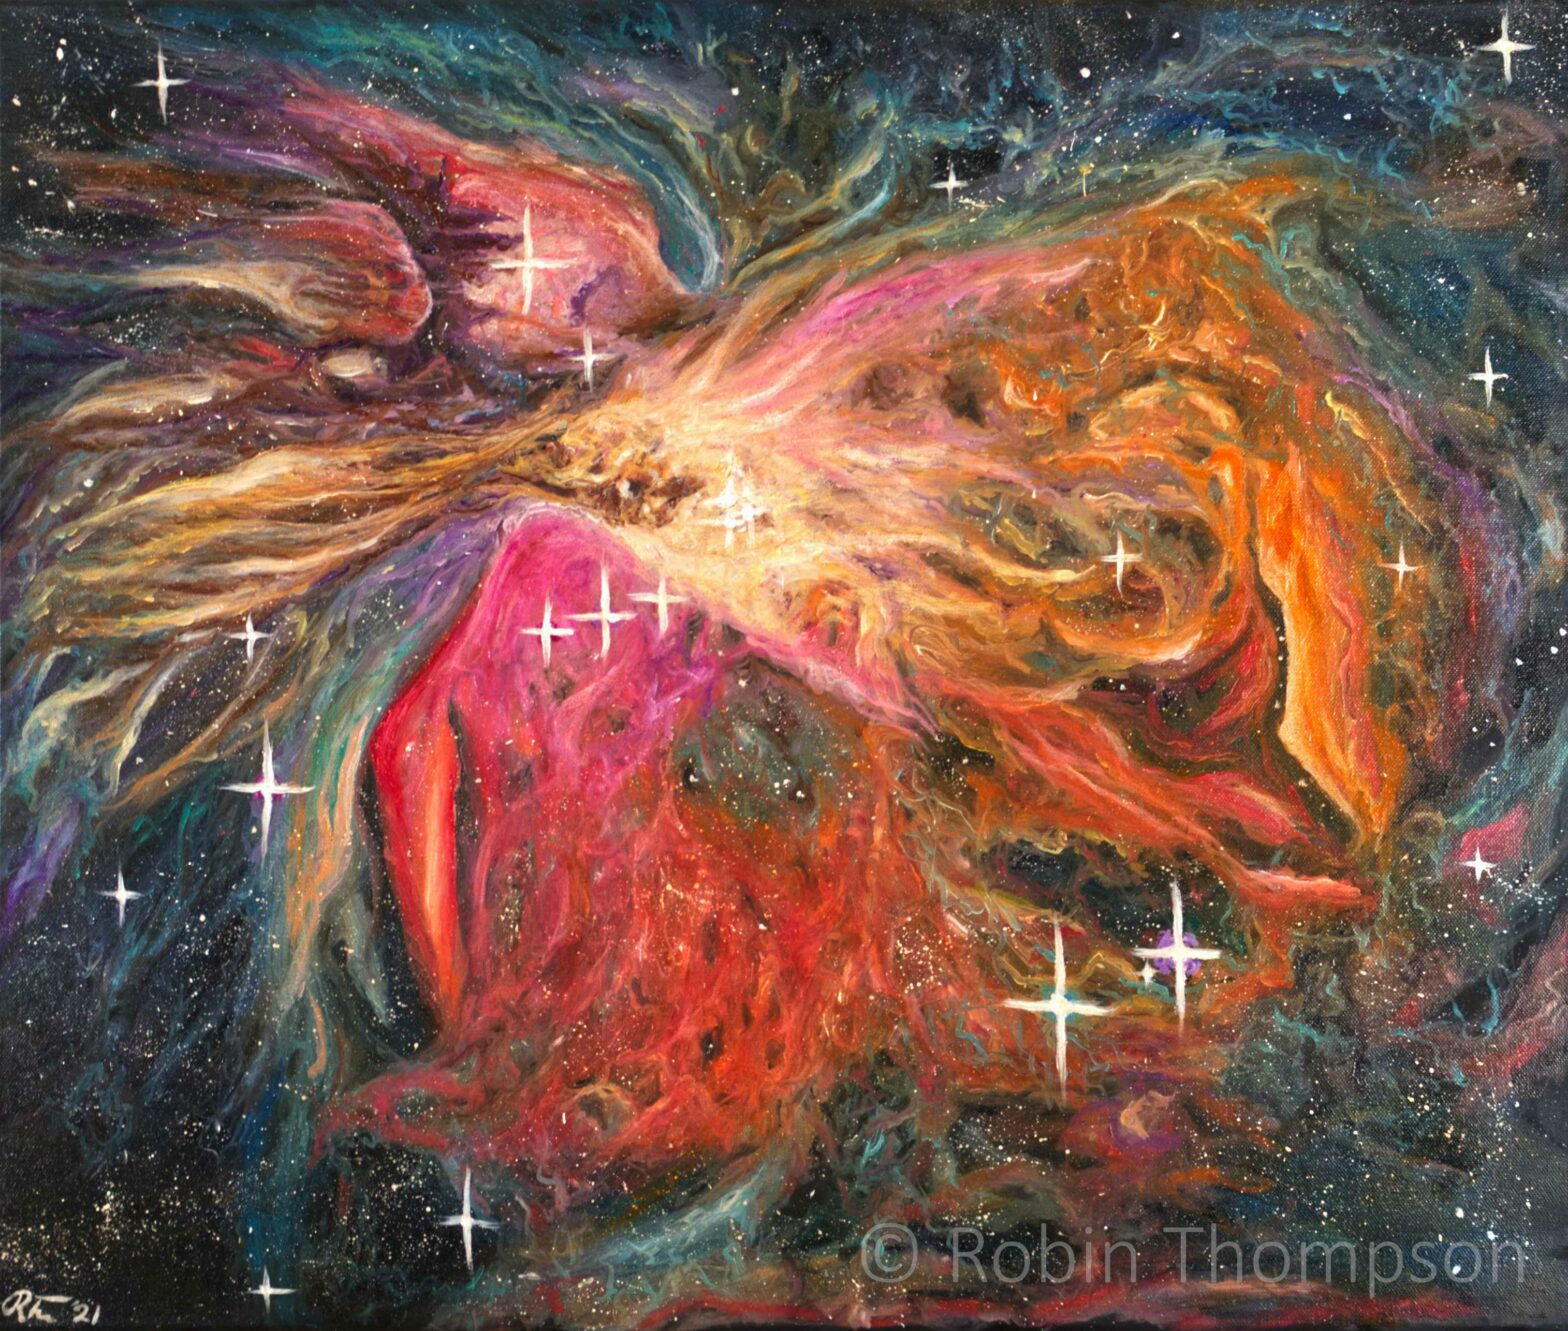 Oil in canvas painting of the Orion Nebula, with large colourful nebula clouds in front of a deep space background. Stars can be seen shimmering throughout the composition.